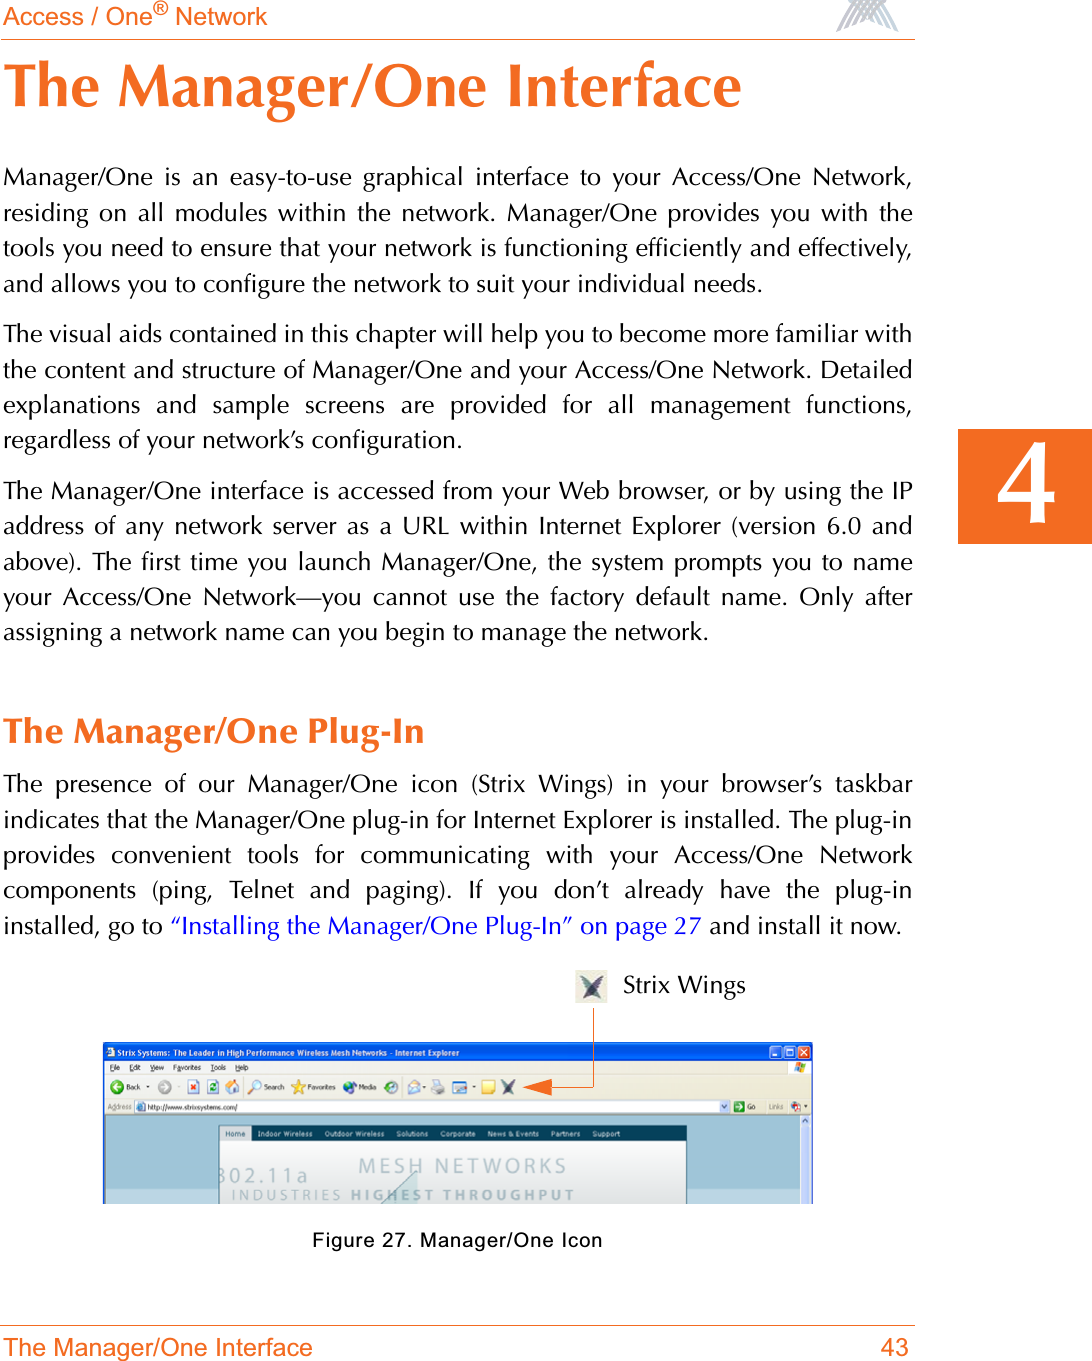 Access / One® NetworkThe Manager/One Interface 434The Manager/One InterfaceManager/One is an easy-to-use graphical interface to your Access/One Network,residing on all modules within the network. Manager/One provides you with thetools you need to ensure that your network is functioning efficiently and effectively,and allows you to configure the network to suit your individual needs.The visual aids contained in this chapter will help you to become more familiar withthe content and structure of Manager/One and your Access/One Network. Detailedexplanations and sample screens are provided for all management functions,regardless of your network’s configuration.The Manager/One interface is accessed from your Web browser, or by using the IPaddress of any network server as a URL within Internet Explorer (version 6.0 andabove). The first time you launch Manager/One, the system prompts you to nameyour Access/One Network—you cannot use the factory default name. Only afterassigning a network name can you begin to manage the network.The Manager/One Plug-InThe presence of our Manager/One icon (Strix Wings) in your browser’s taskbarindicates that the Manager/One plug-in for Internet Explorer is installed. The plug-inprovides convenient tools for communicating with your Access/One Networkcomponents (ping, Telnet and paging). If you don’t already have the plug-ininstalled, go to “Installing the Manager/One Plug-In” on page 27 and install it now.Figure 27. Manager/One IconStrix Wings